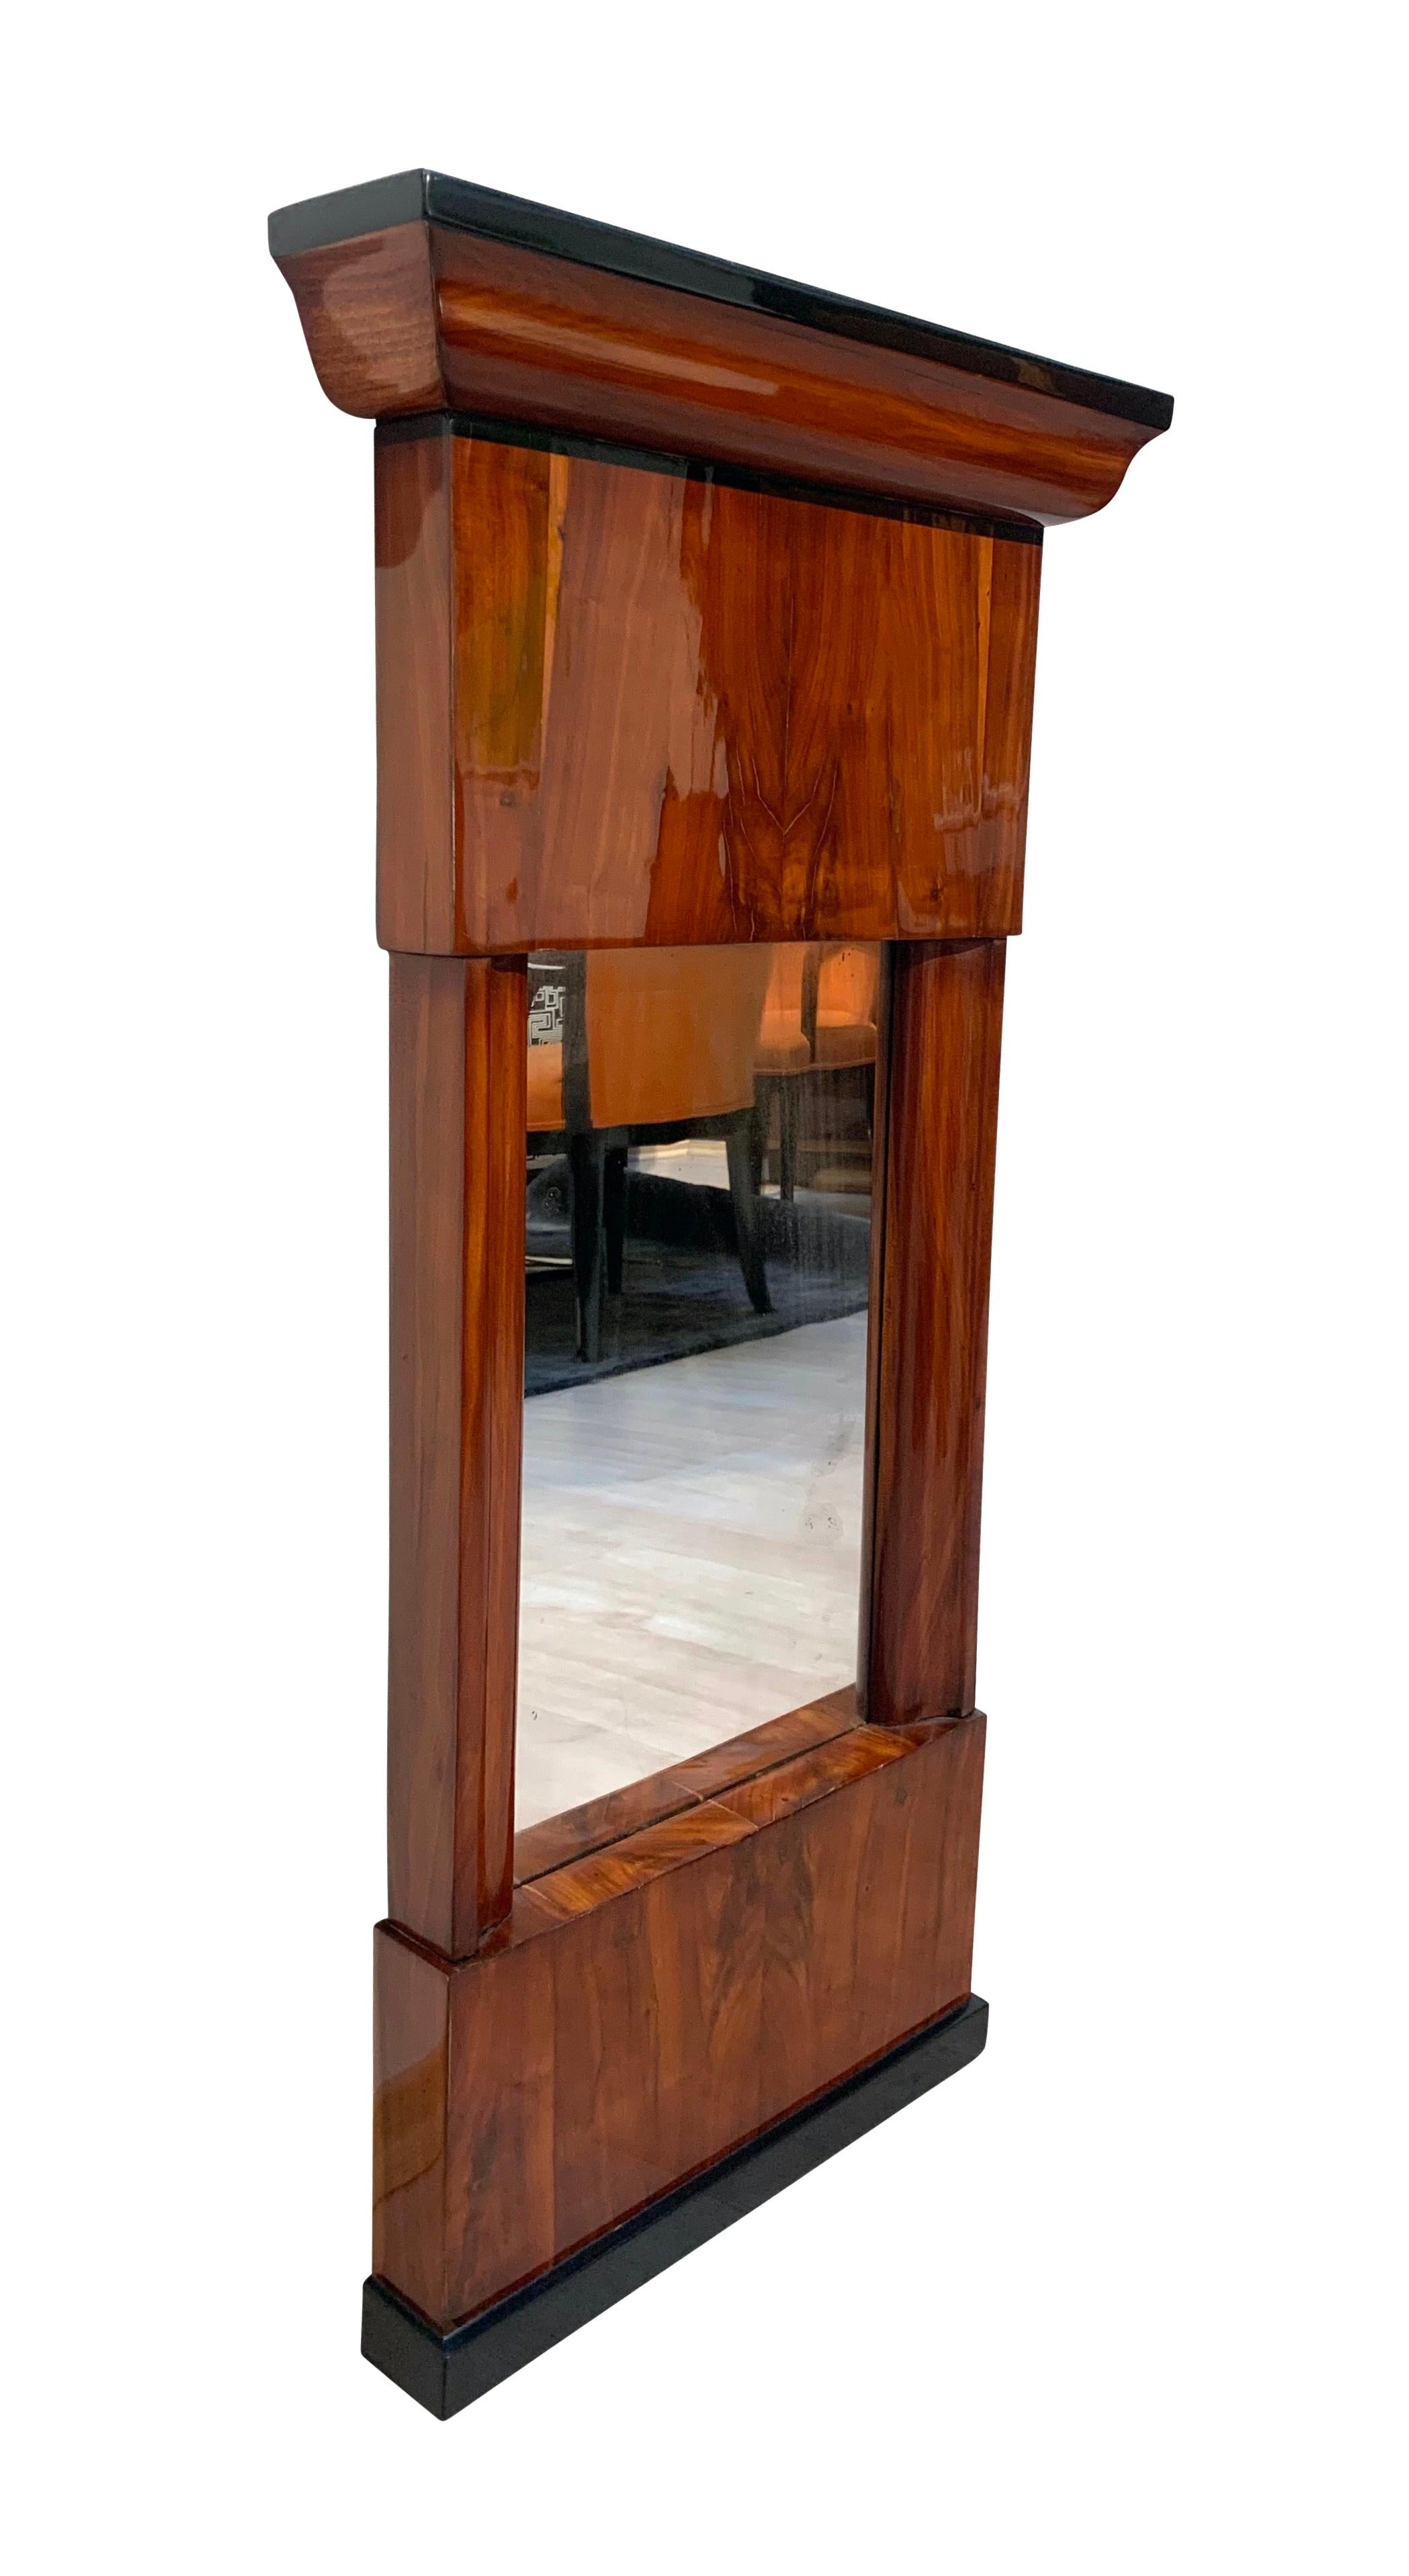 Small Biedermeier mirror in cherry veneer and solid wood from South Germany about 1820.

Curved cornice (so called 